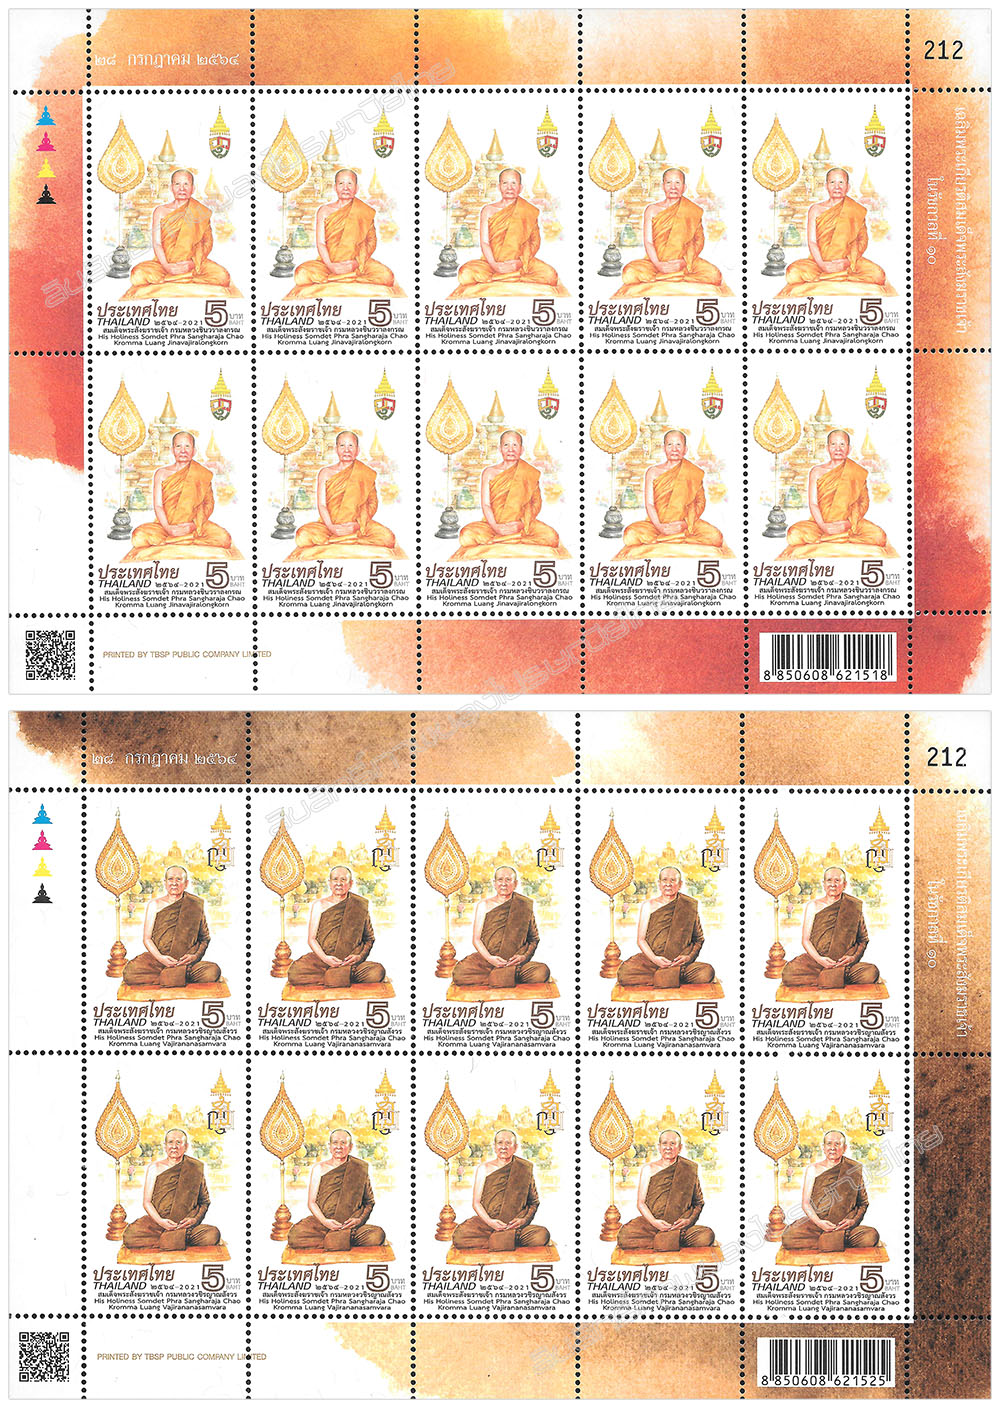 The Glorification of the Supreme Patriarchs of Thailand in the Reign of King Rama X Commemorative Stamps Full Sheet.